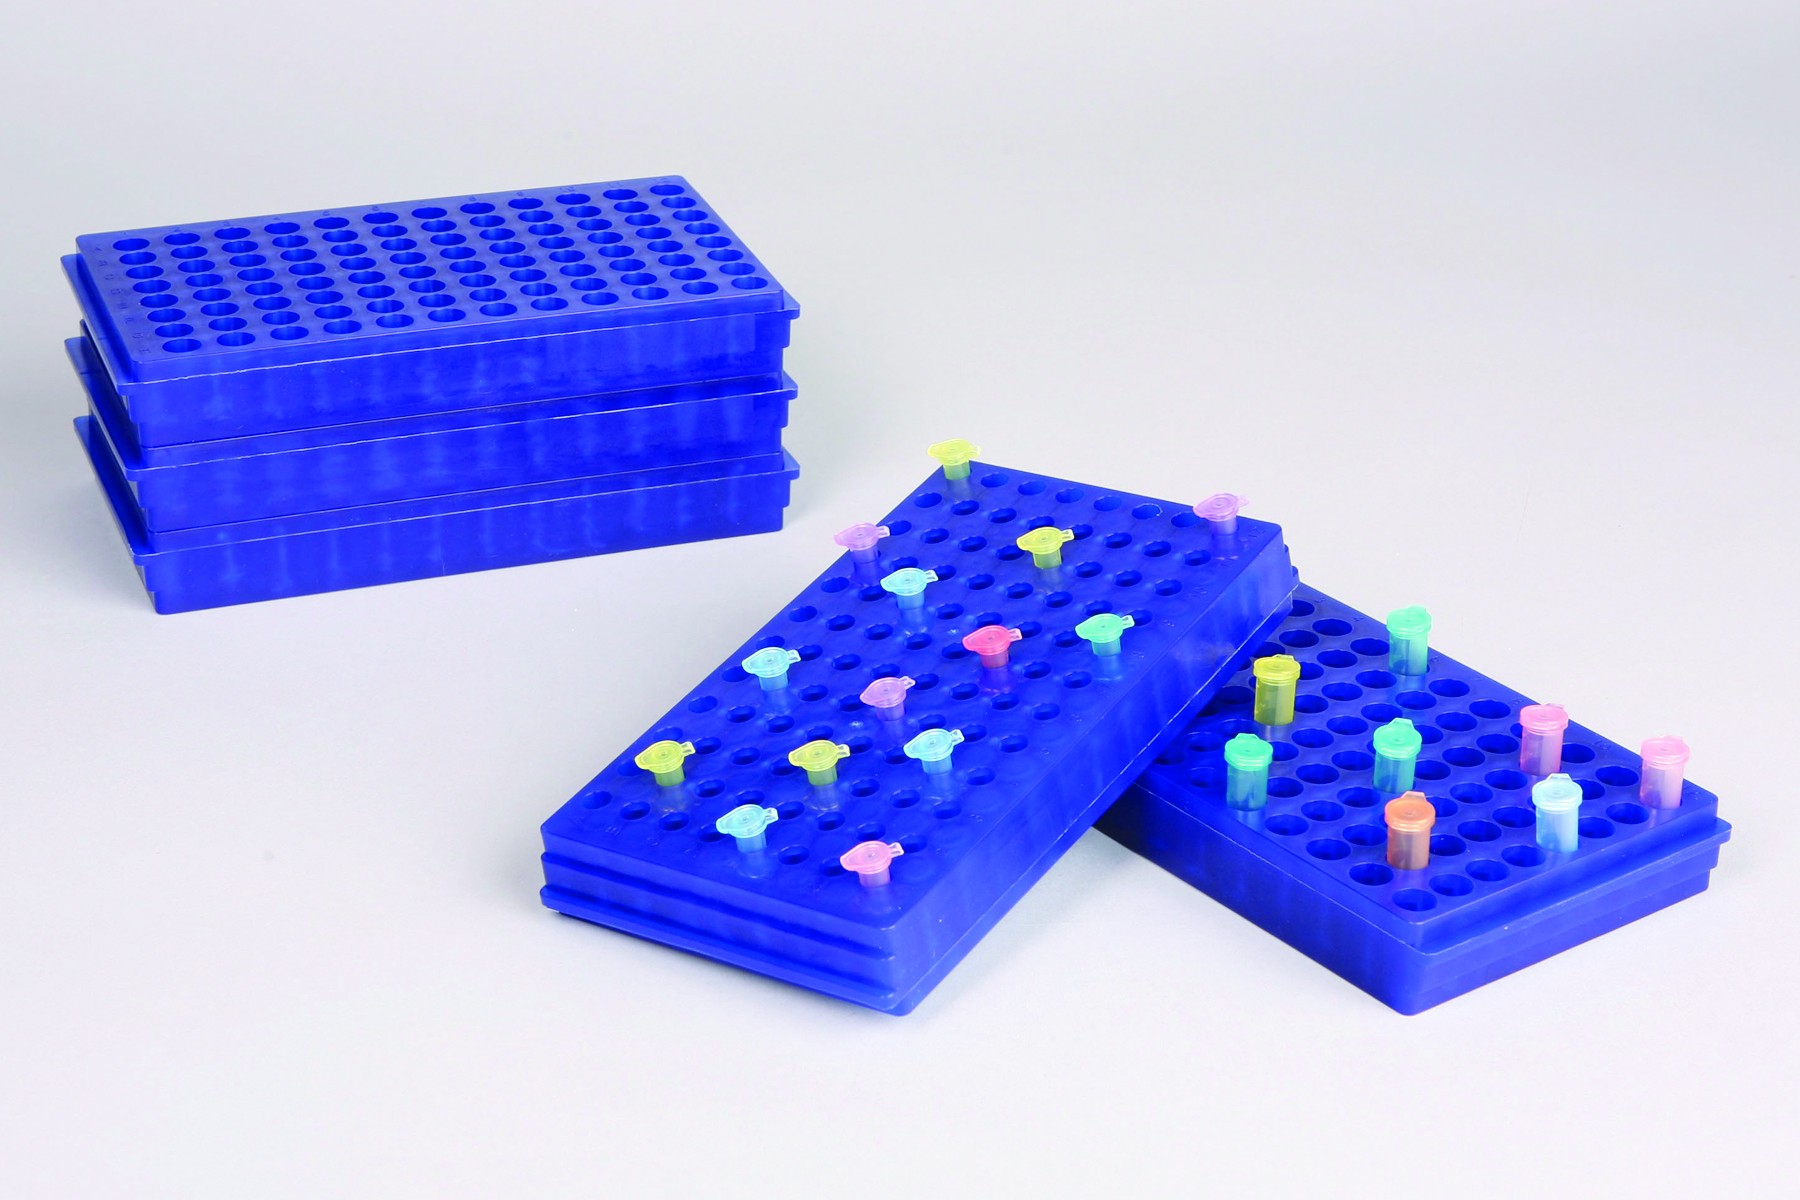 SP Bel-Art Microcentrifuge Tube Rack; For 0.5 or 1.5-2.0ml Tubes, 96 Places, Blue (Pack of 5)